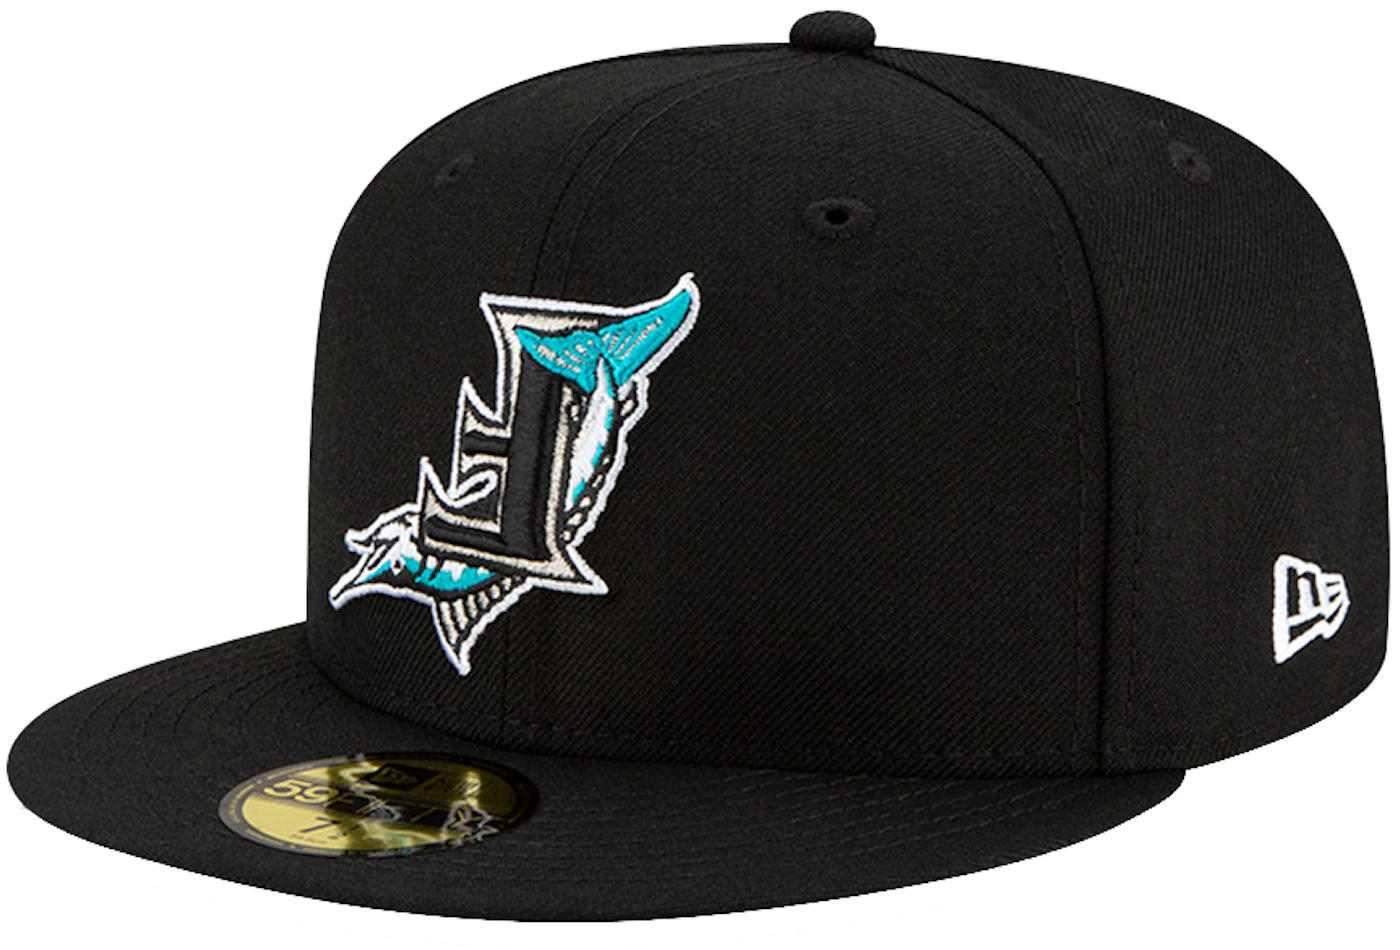 New Era Florida Marlins Upside Down 59Fifty Fitted Hat Black Men's - FW21 -  US